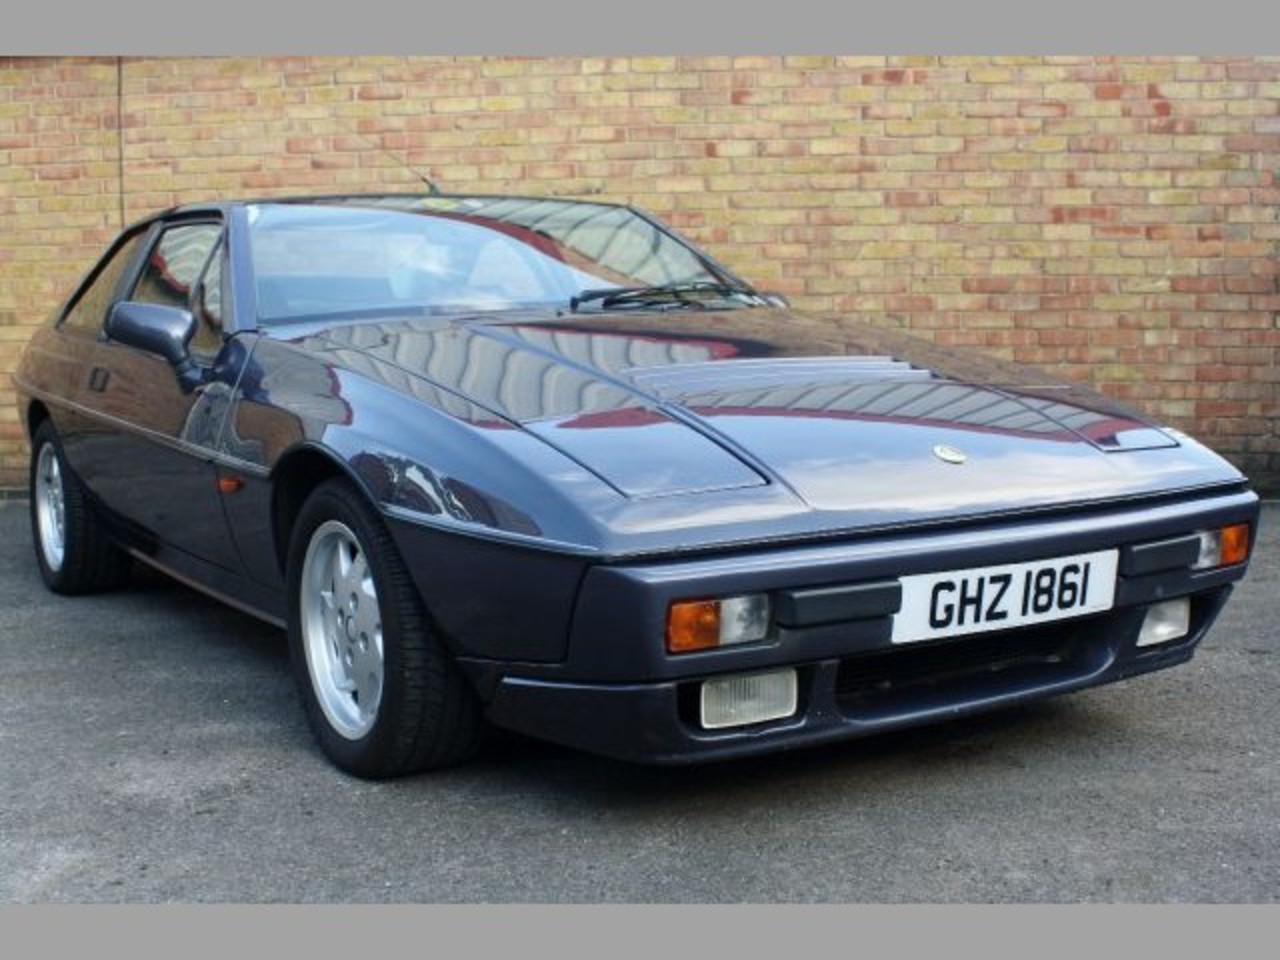 Lotus Excel 2 Door Saloon SE 2.2 Manual O/D for sale in Witham ...